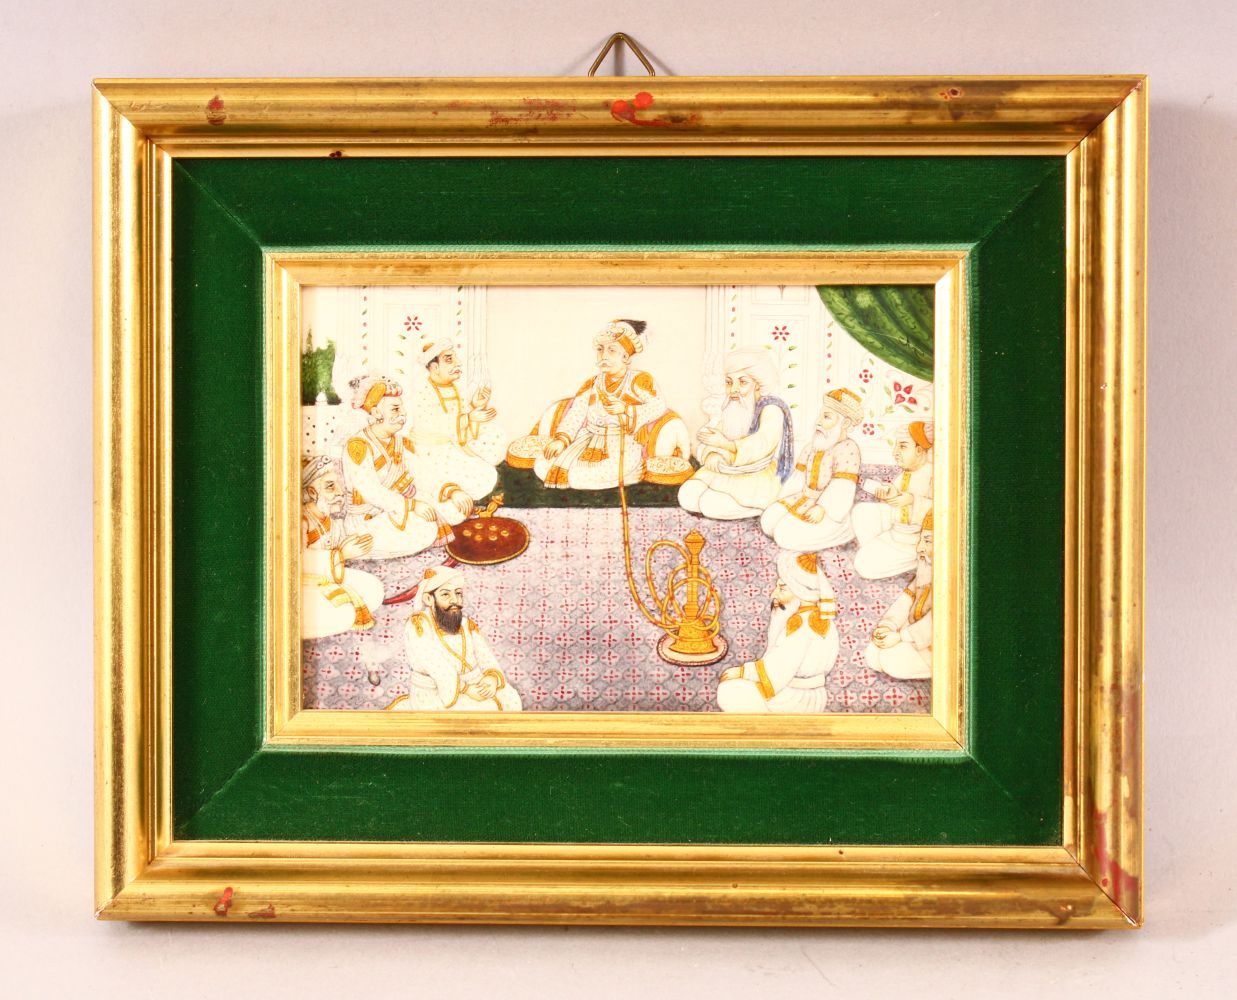 AN INDIAN MINIATURE PAINTING ON BONE OR IVORY - depicting male figures seated around a pipe - framed